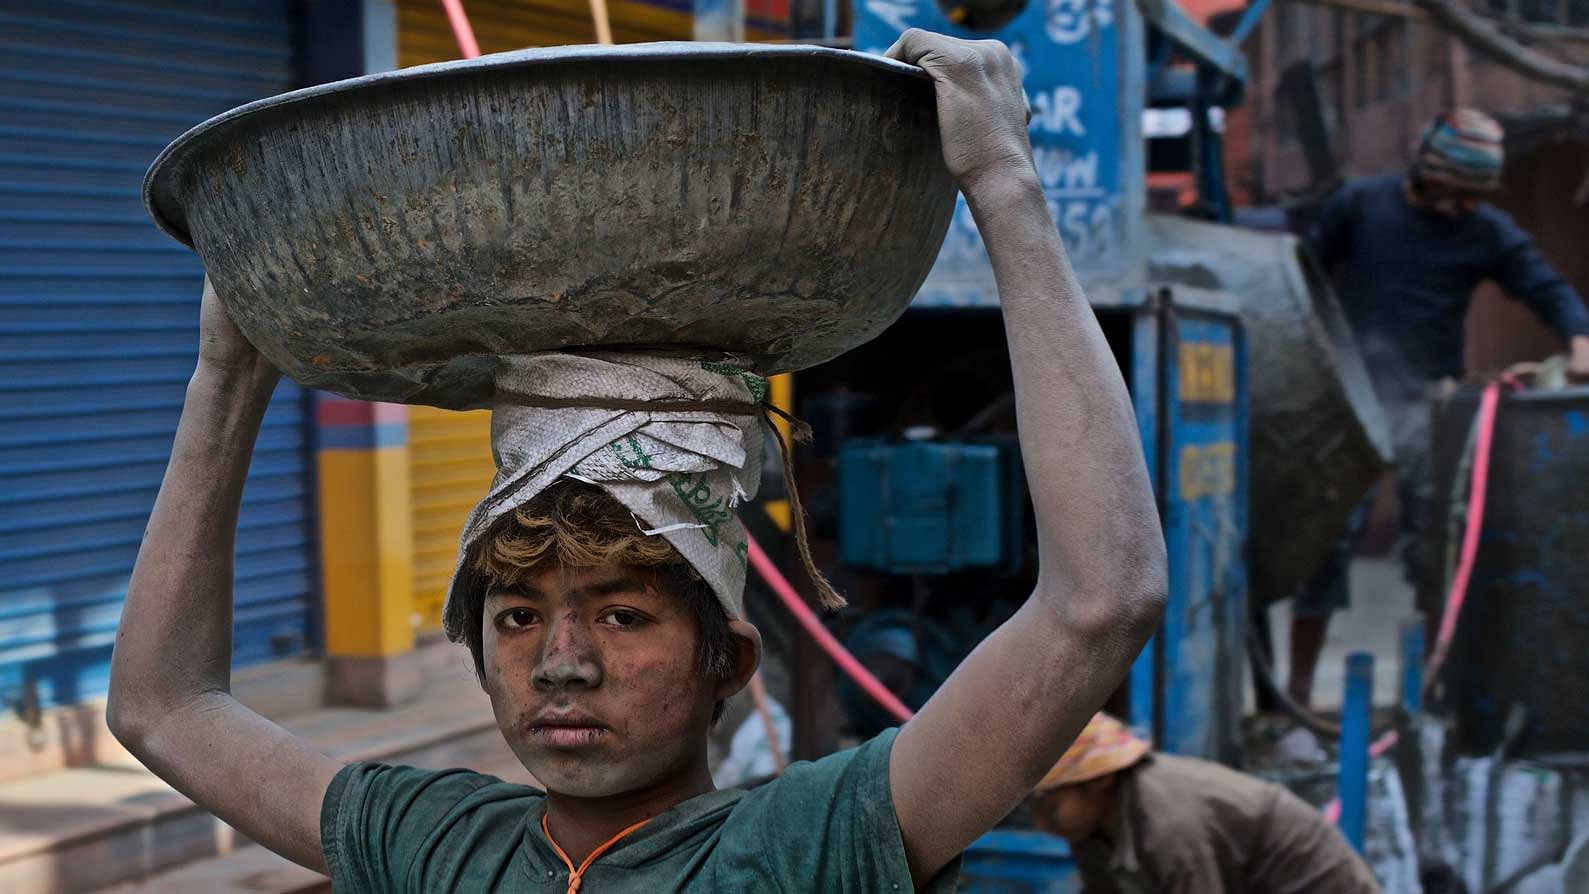 File Photo: An amendment to the Child Labour Act was passed, which will allow children under 14 to help their parents with home-based work. Image used for representational purpose.&nbsp;